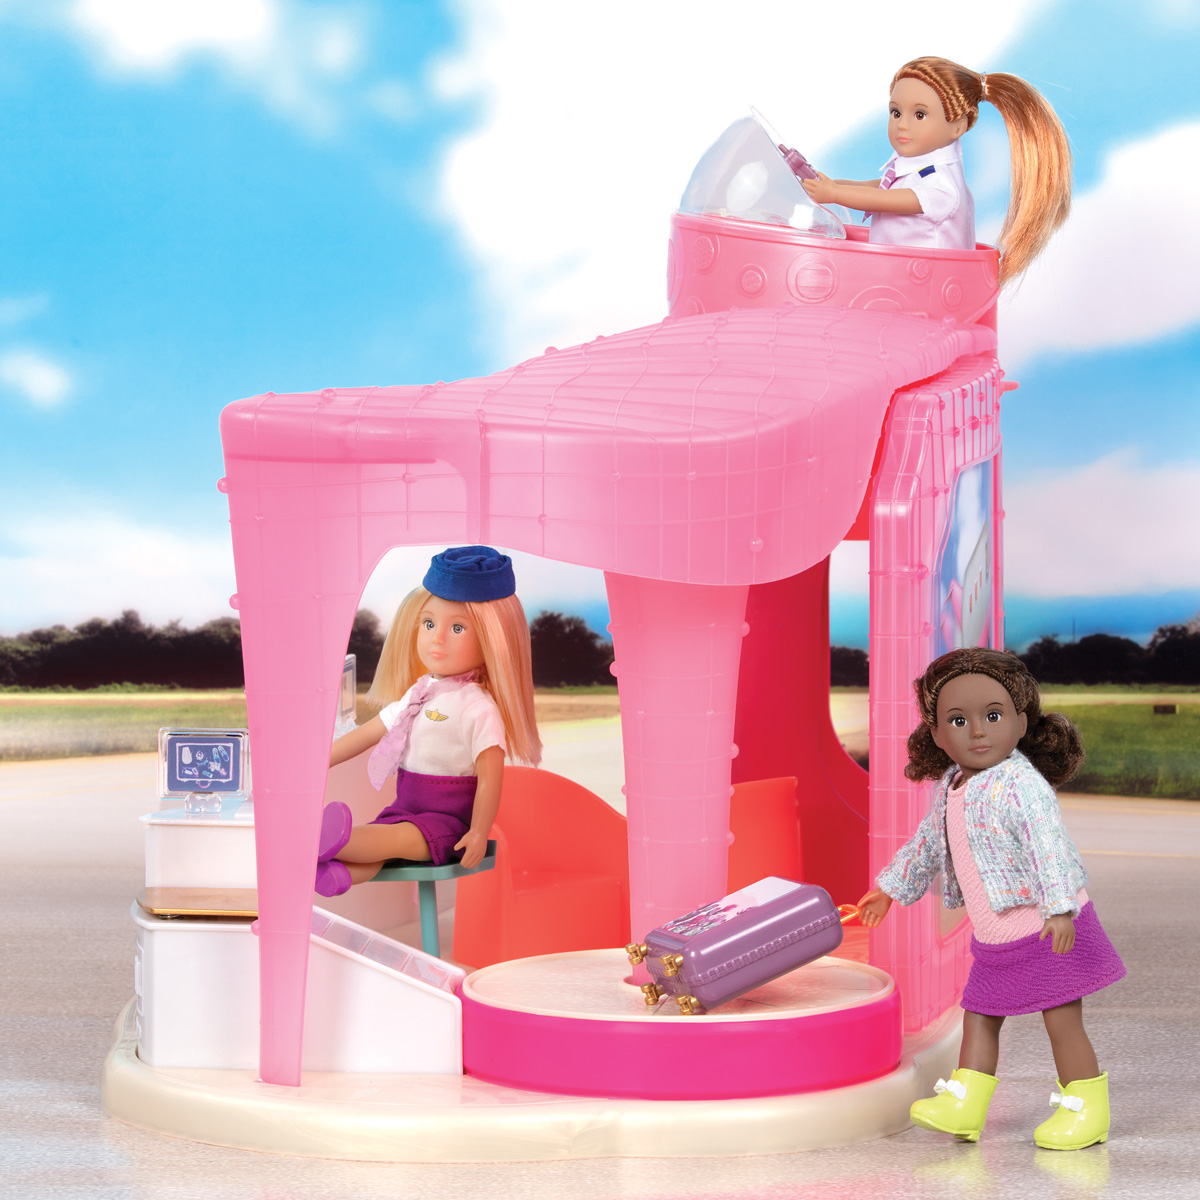 Details about   Lori Dolls Jetset Airways  Airport for 6 inch Dolls New Free Shipping 